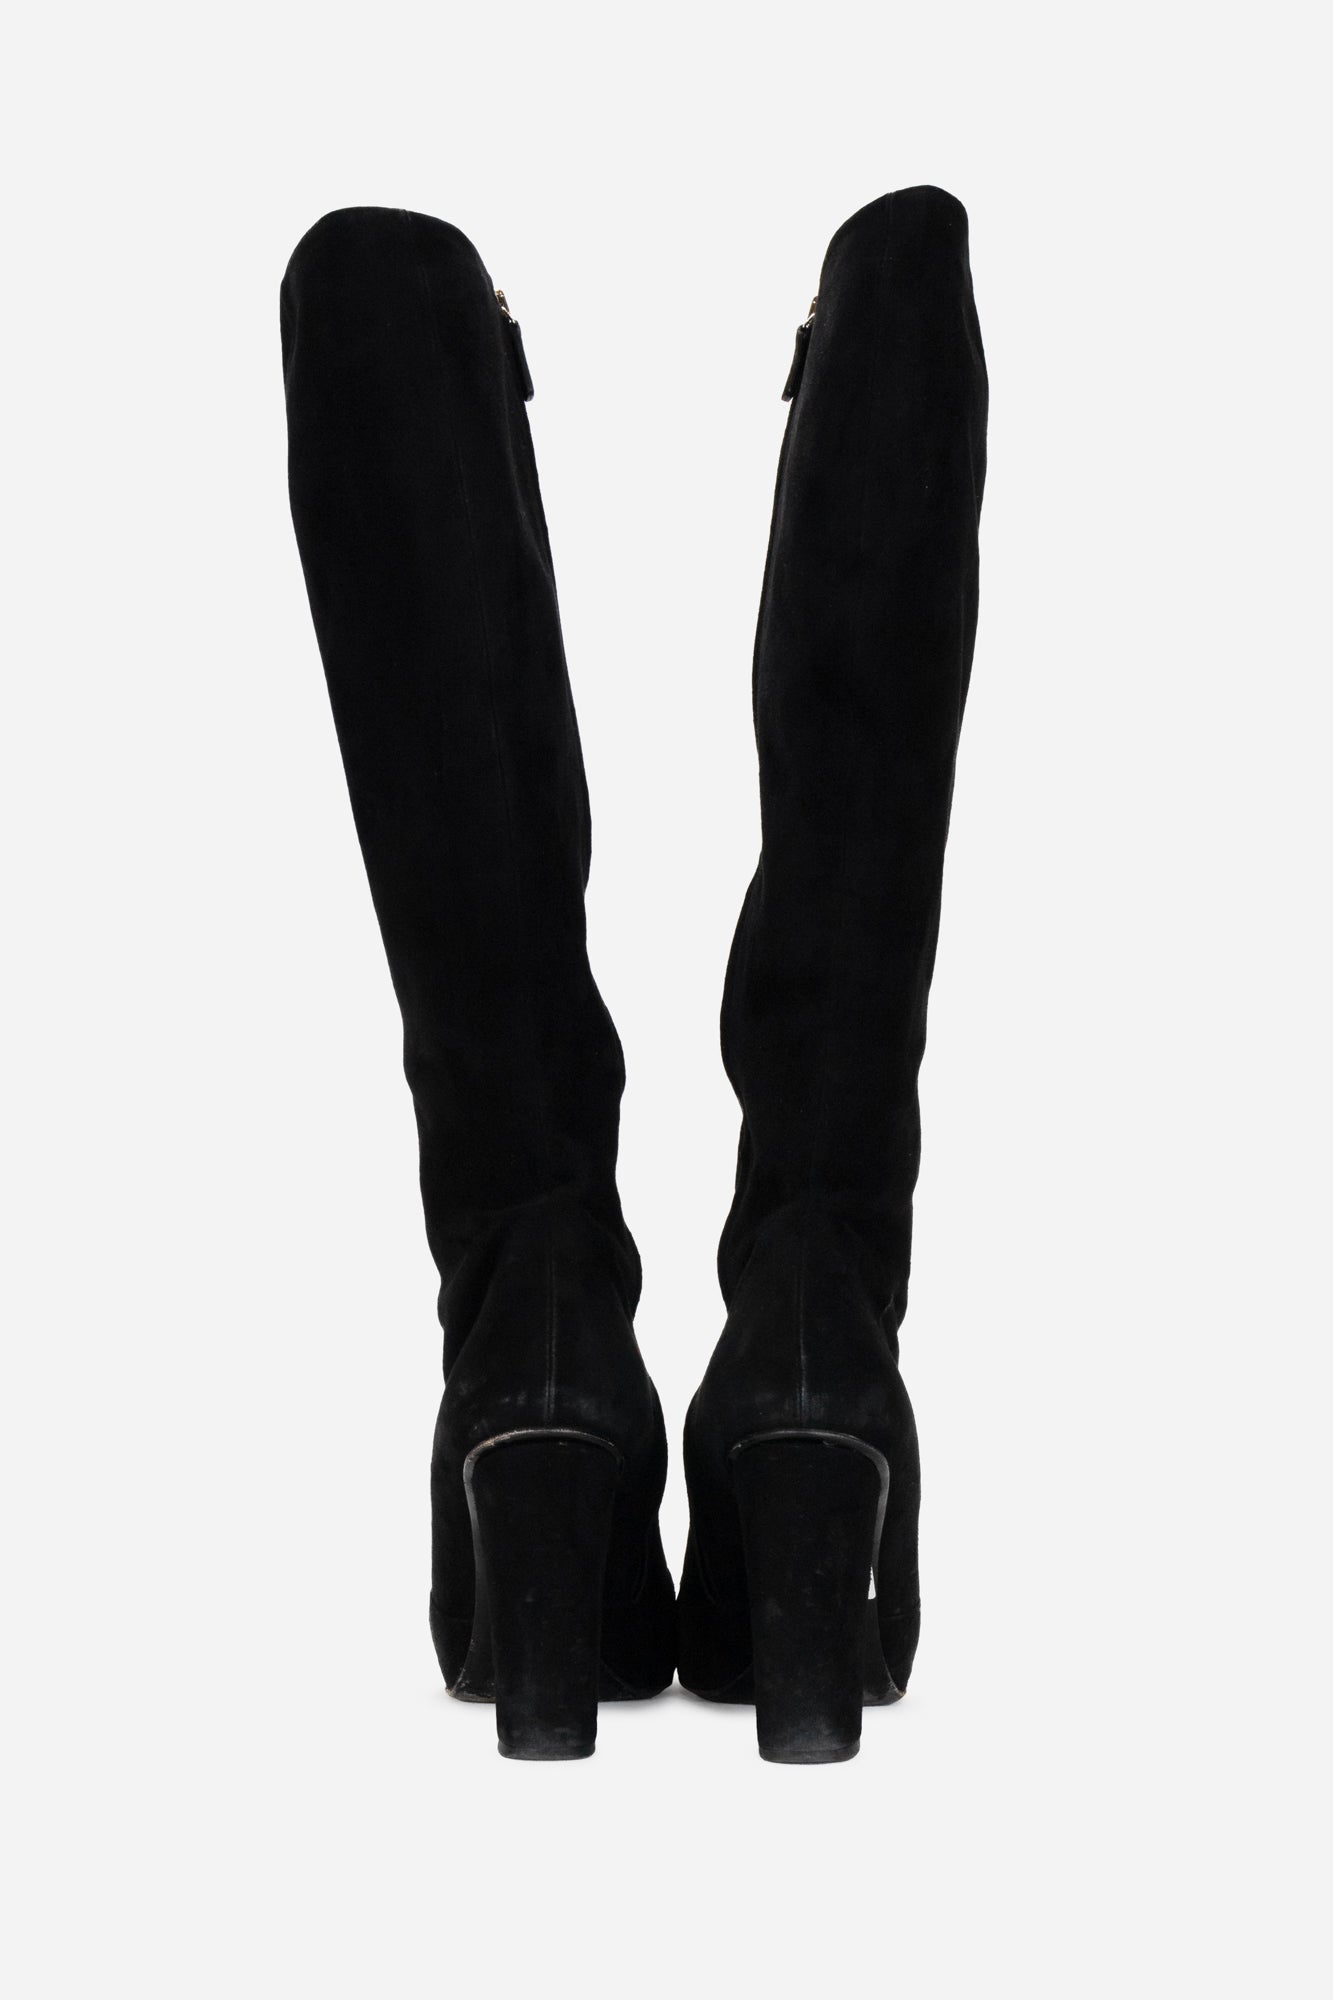 Black Suede Knee High with Horse-Bit & Tongue